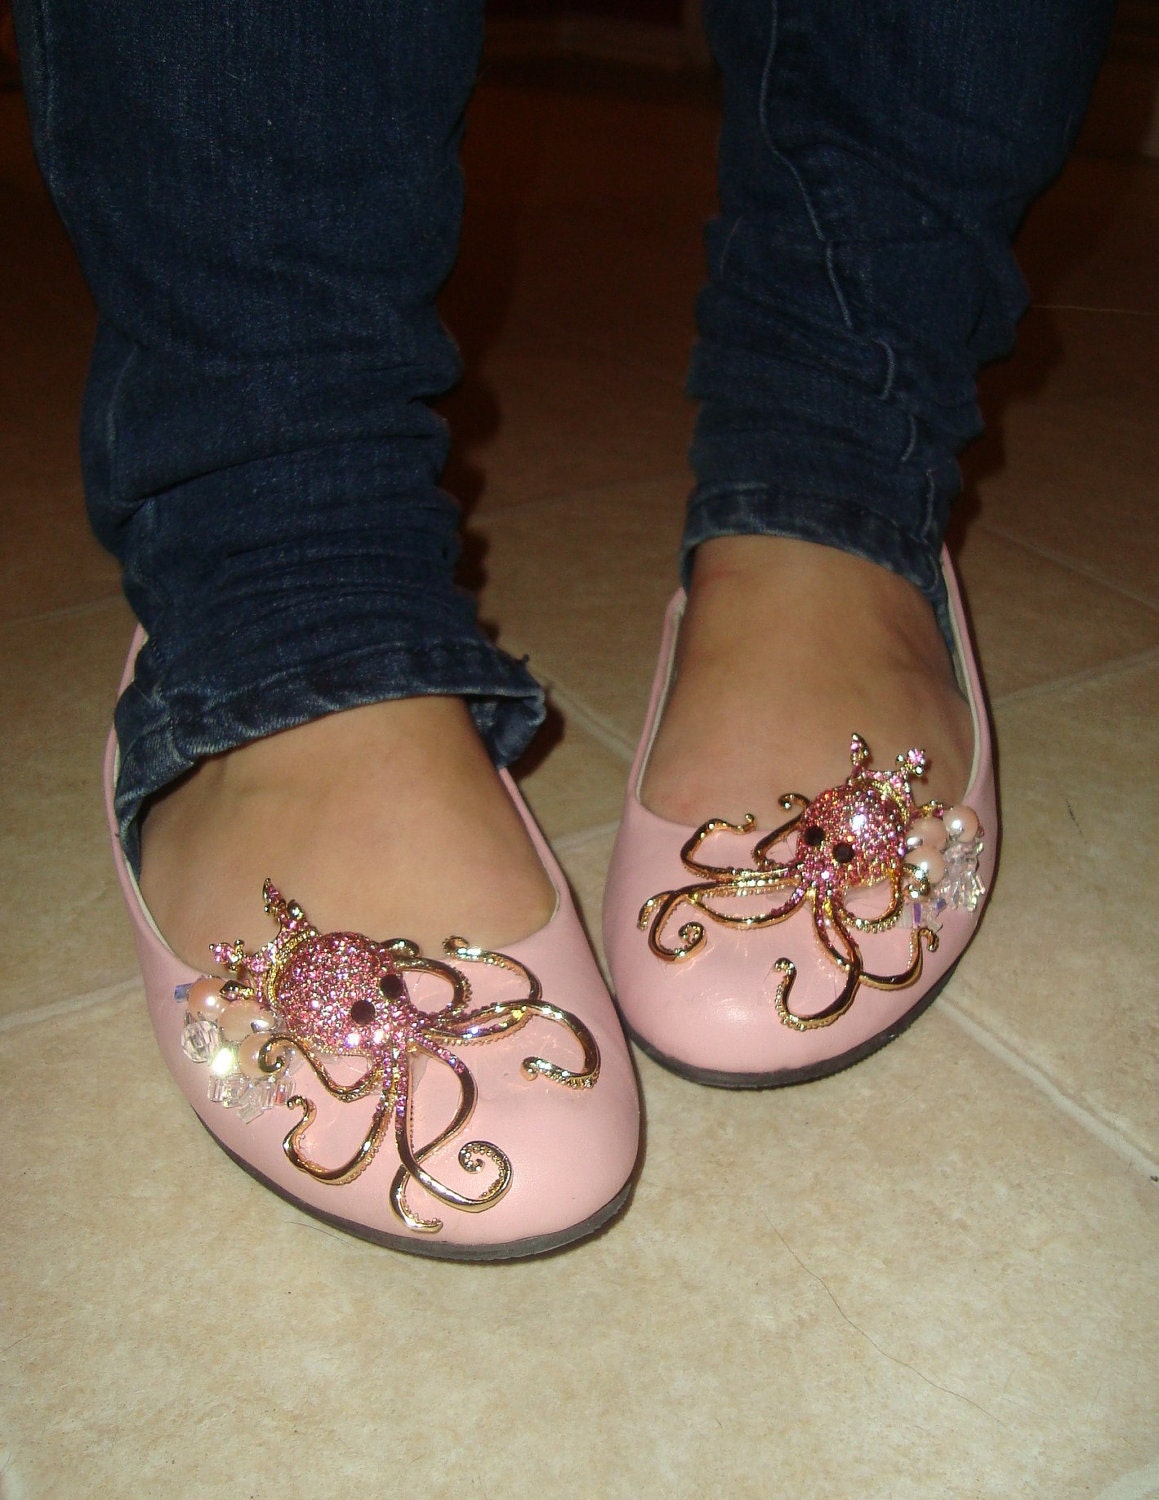 octopus shoes